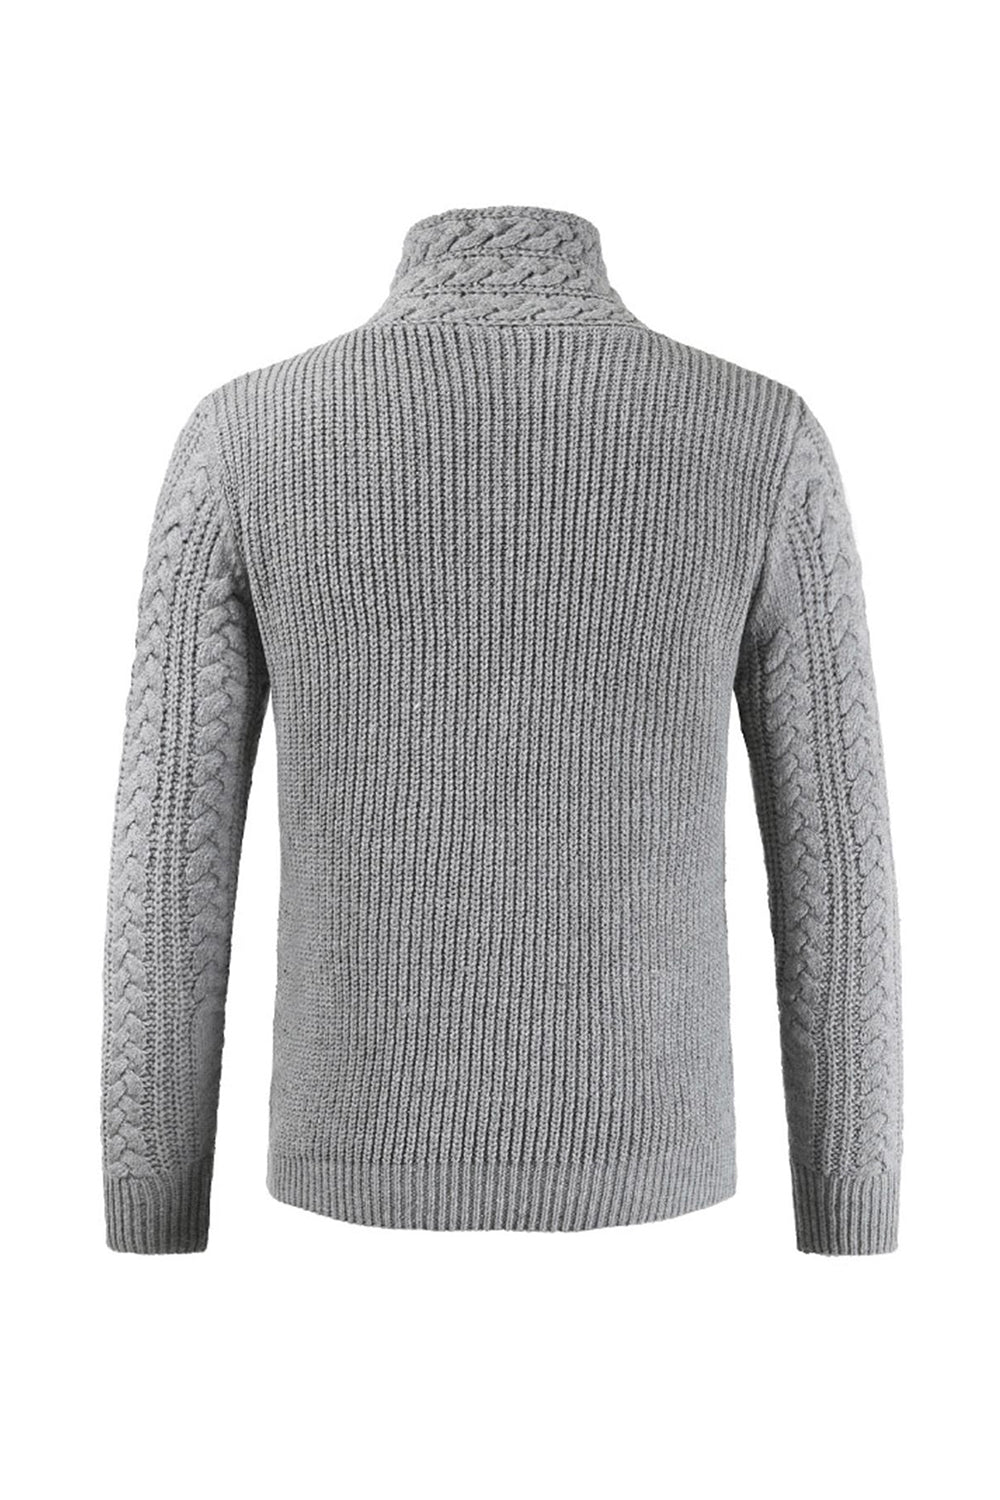 Grey Men's Casual High Neck Buckle Knitted Pullover Sweater